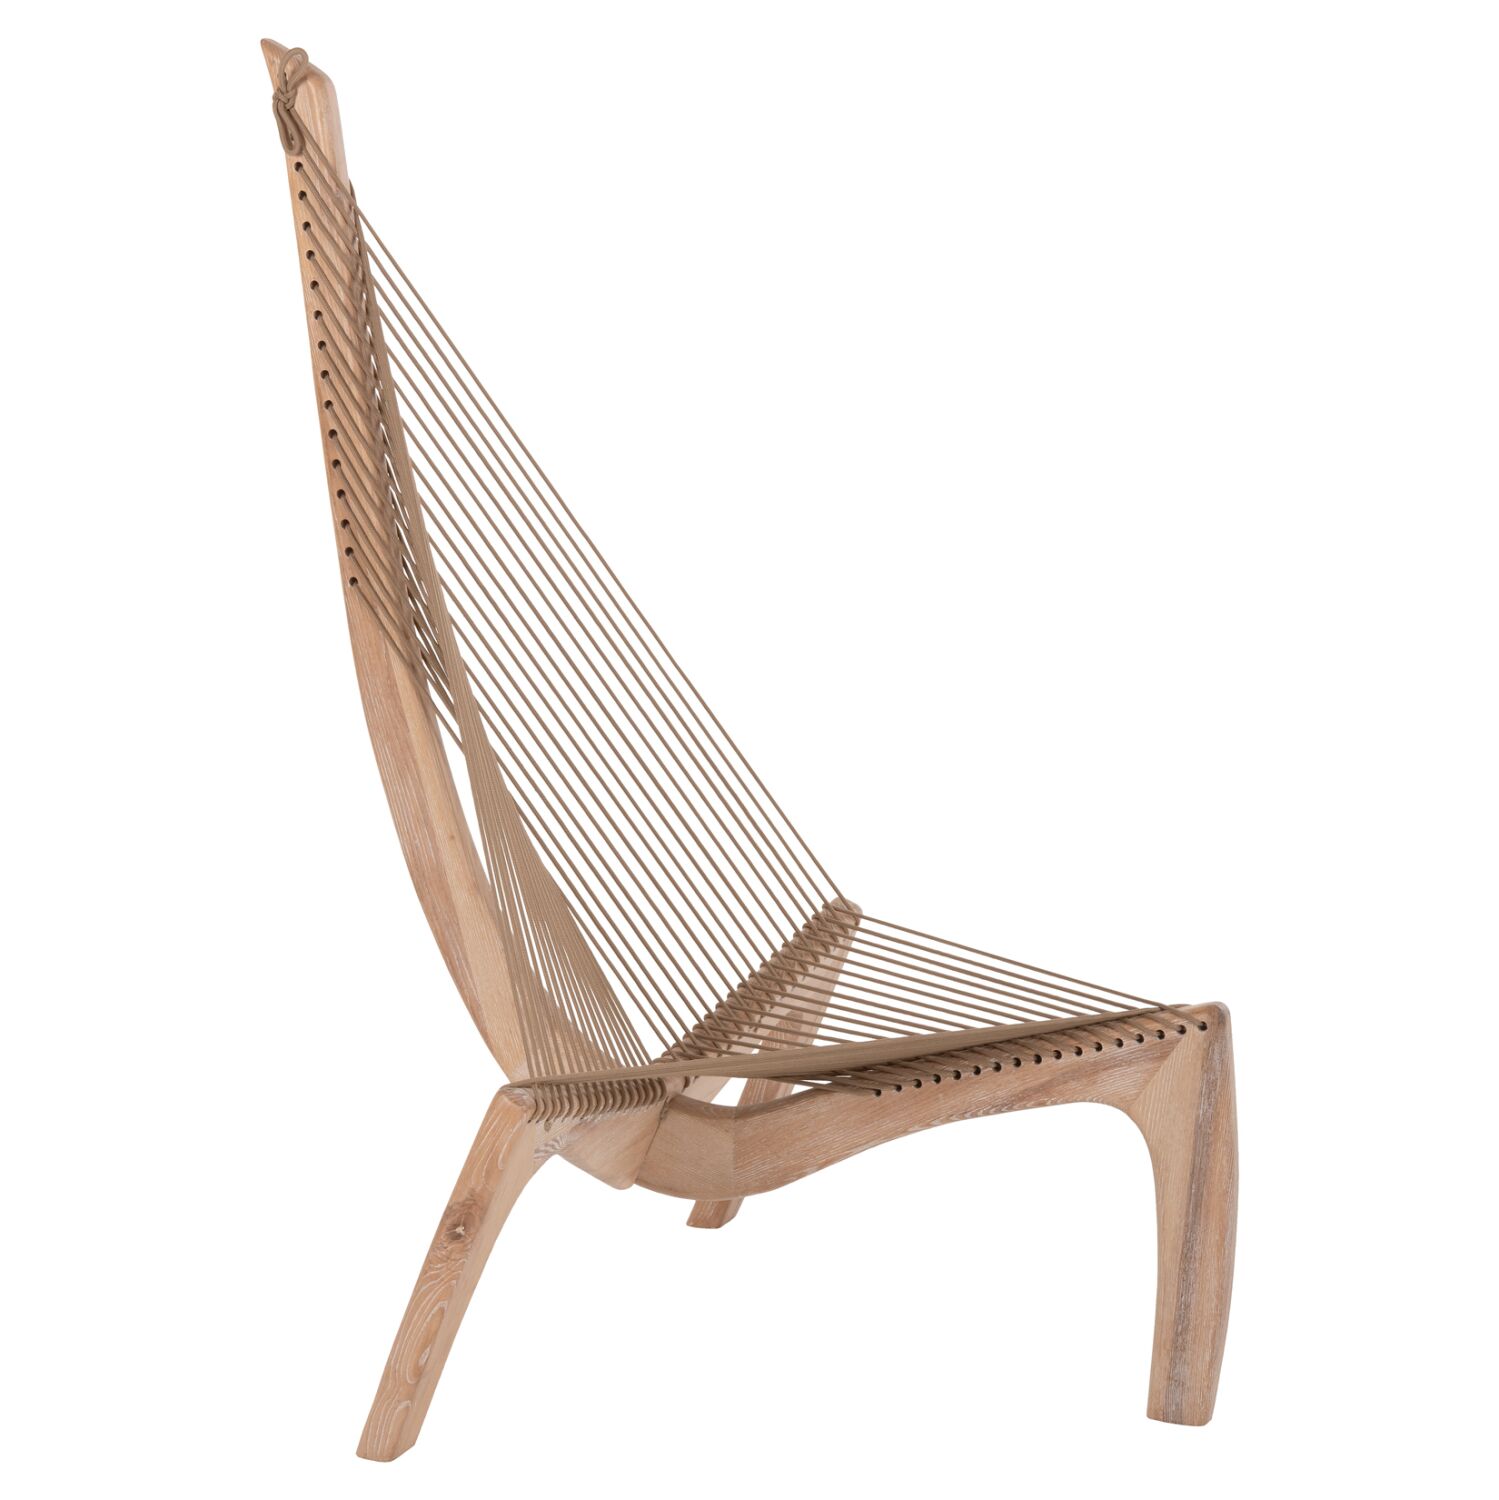 LOUNGE CHAIR HARP HM9861 ASH WOOD FRAME AND SYNTHETIC ROPE IN NATURAL COLOR 85x101,5x128,5Hcm.